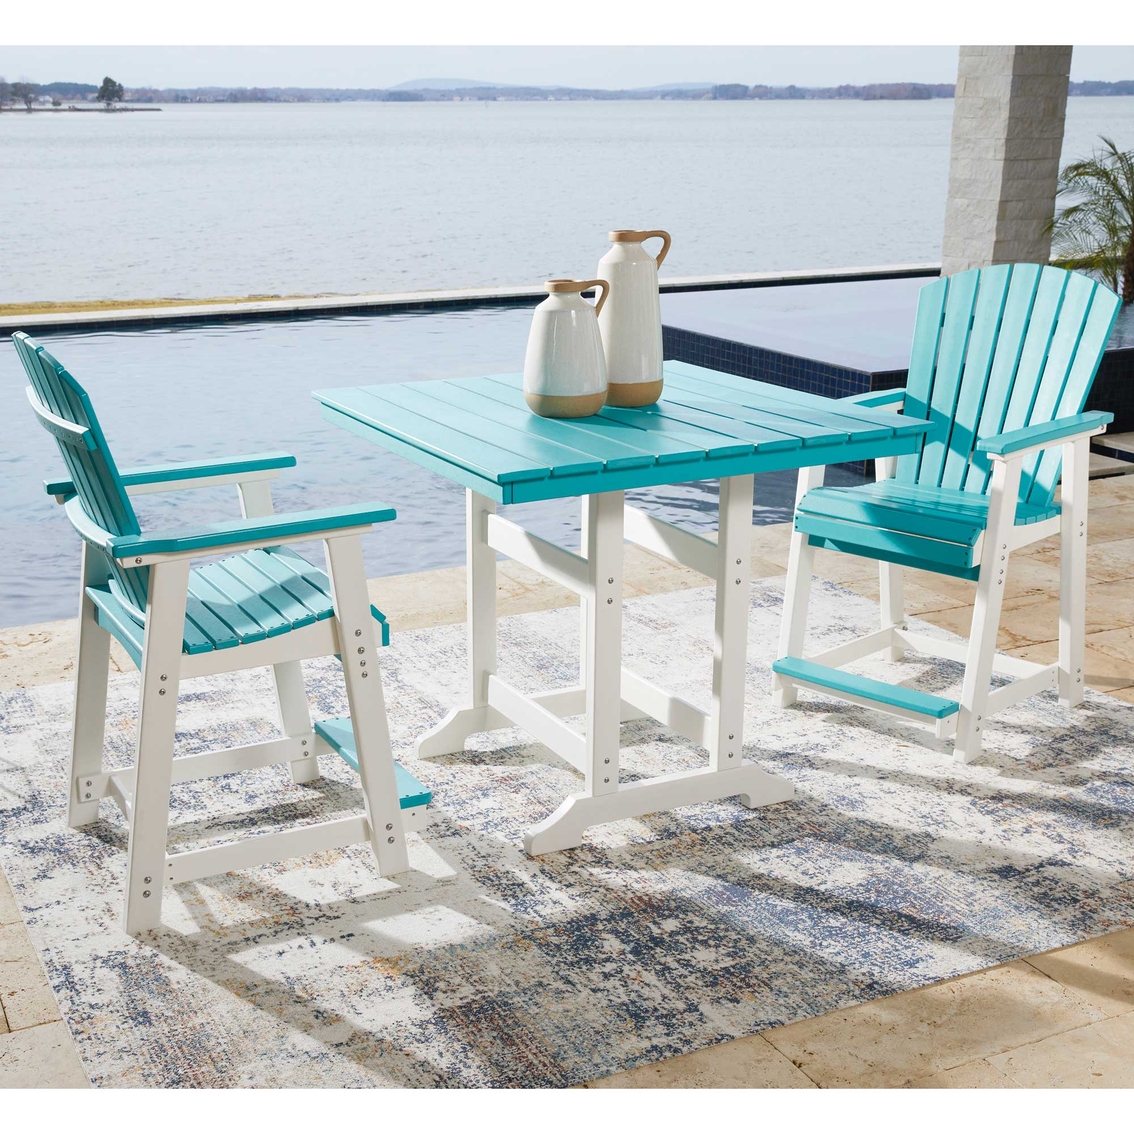 Signature Design by Ashley Eisely Outdoor Counter Height Table Set 3 pc. - Image 7 of 8